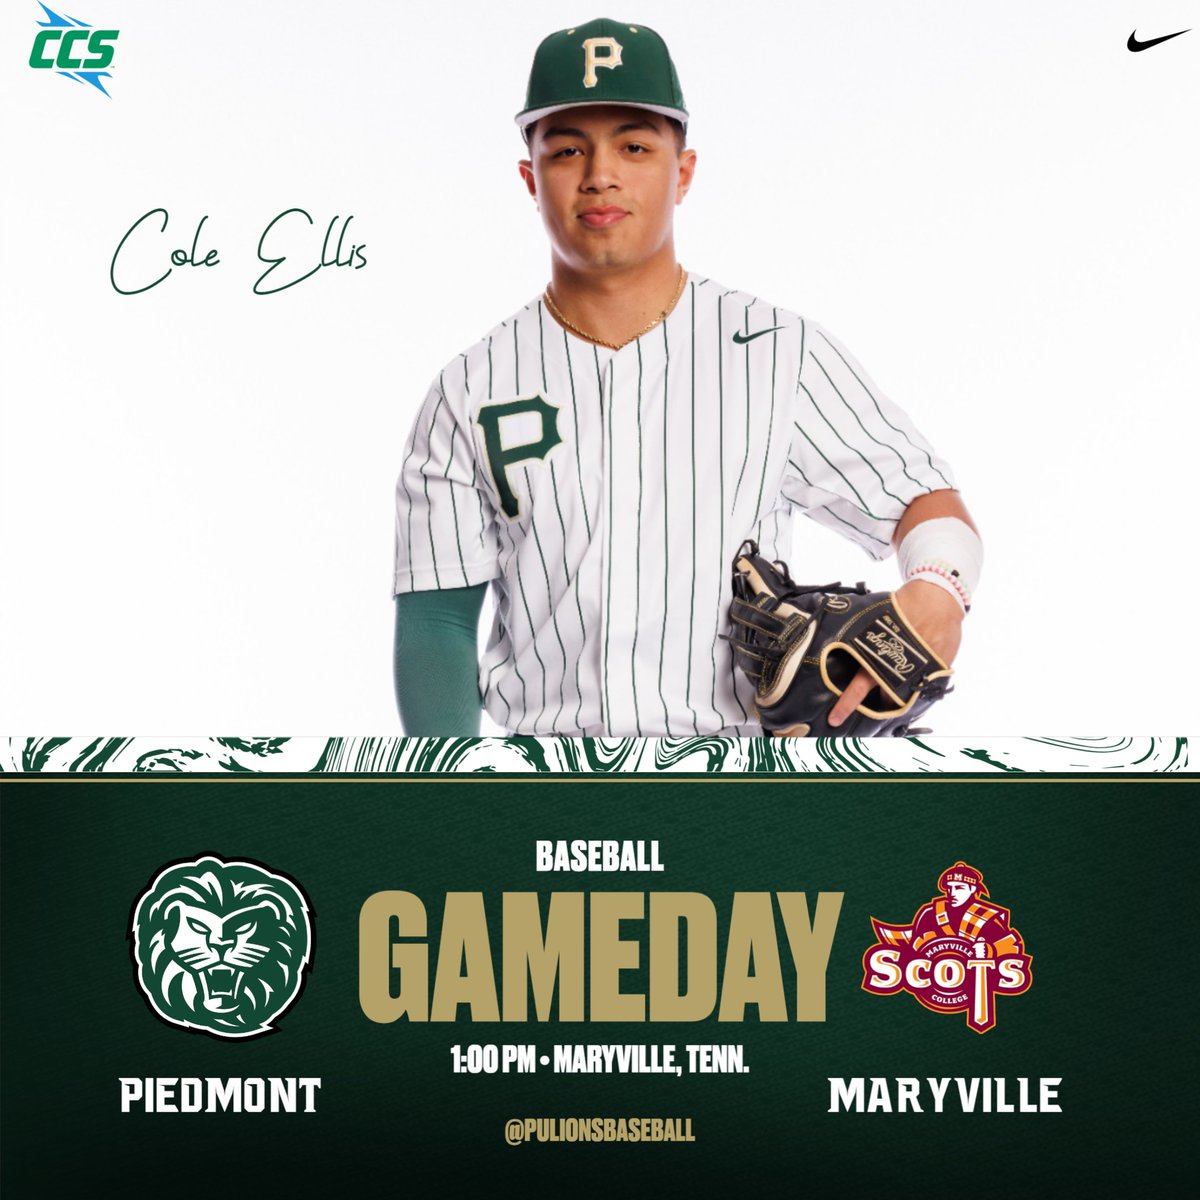 Elimination game for @PULionsBaseball as they try to keep their hopes of repeating alive! ⏰ 1 p.m. 🆚 Maryville (Maryville, Tenn.) 📈 bit.ly/3WEJHwv 📺 bit.ly/4dxvfwq